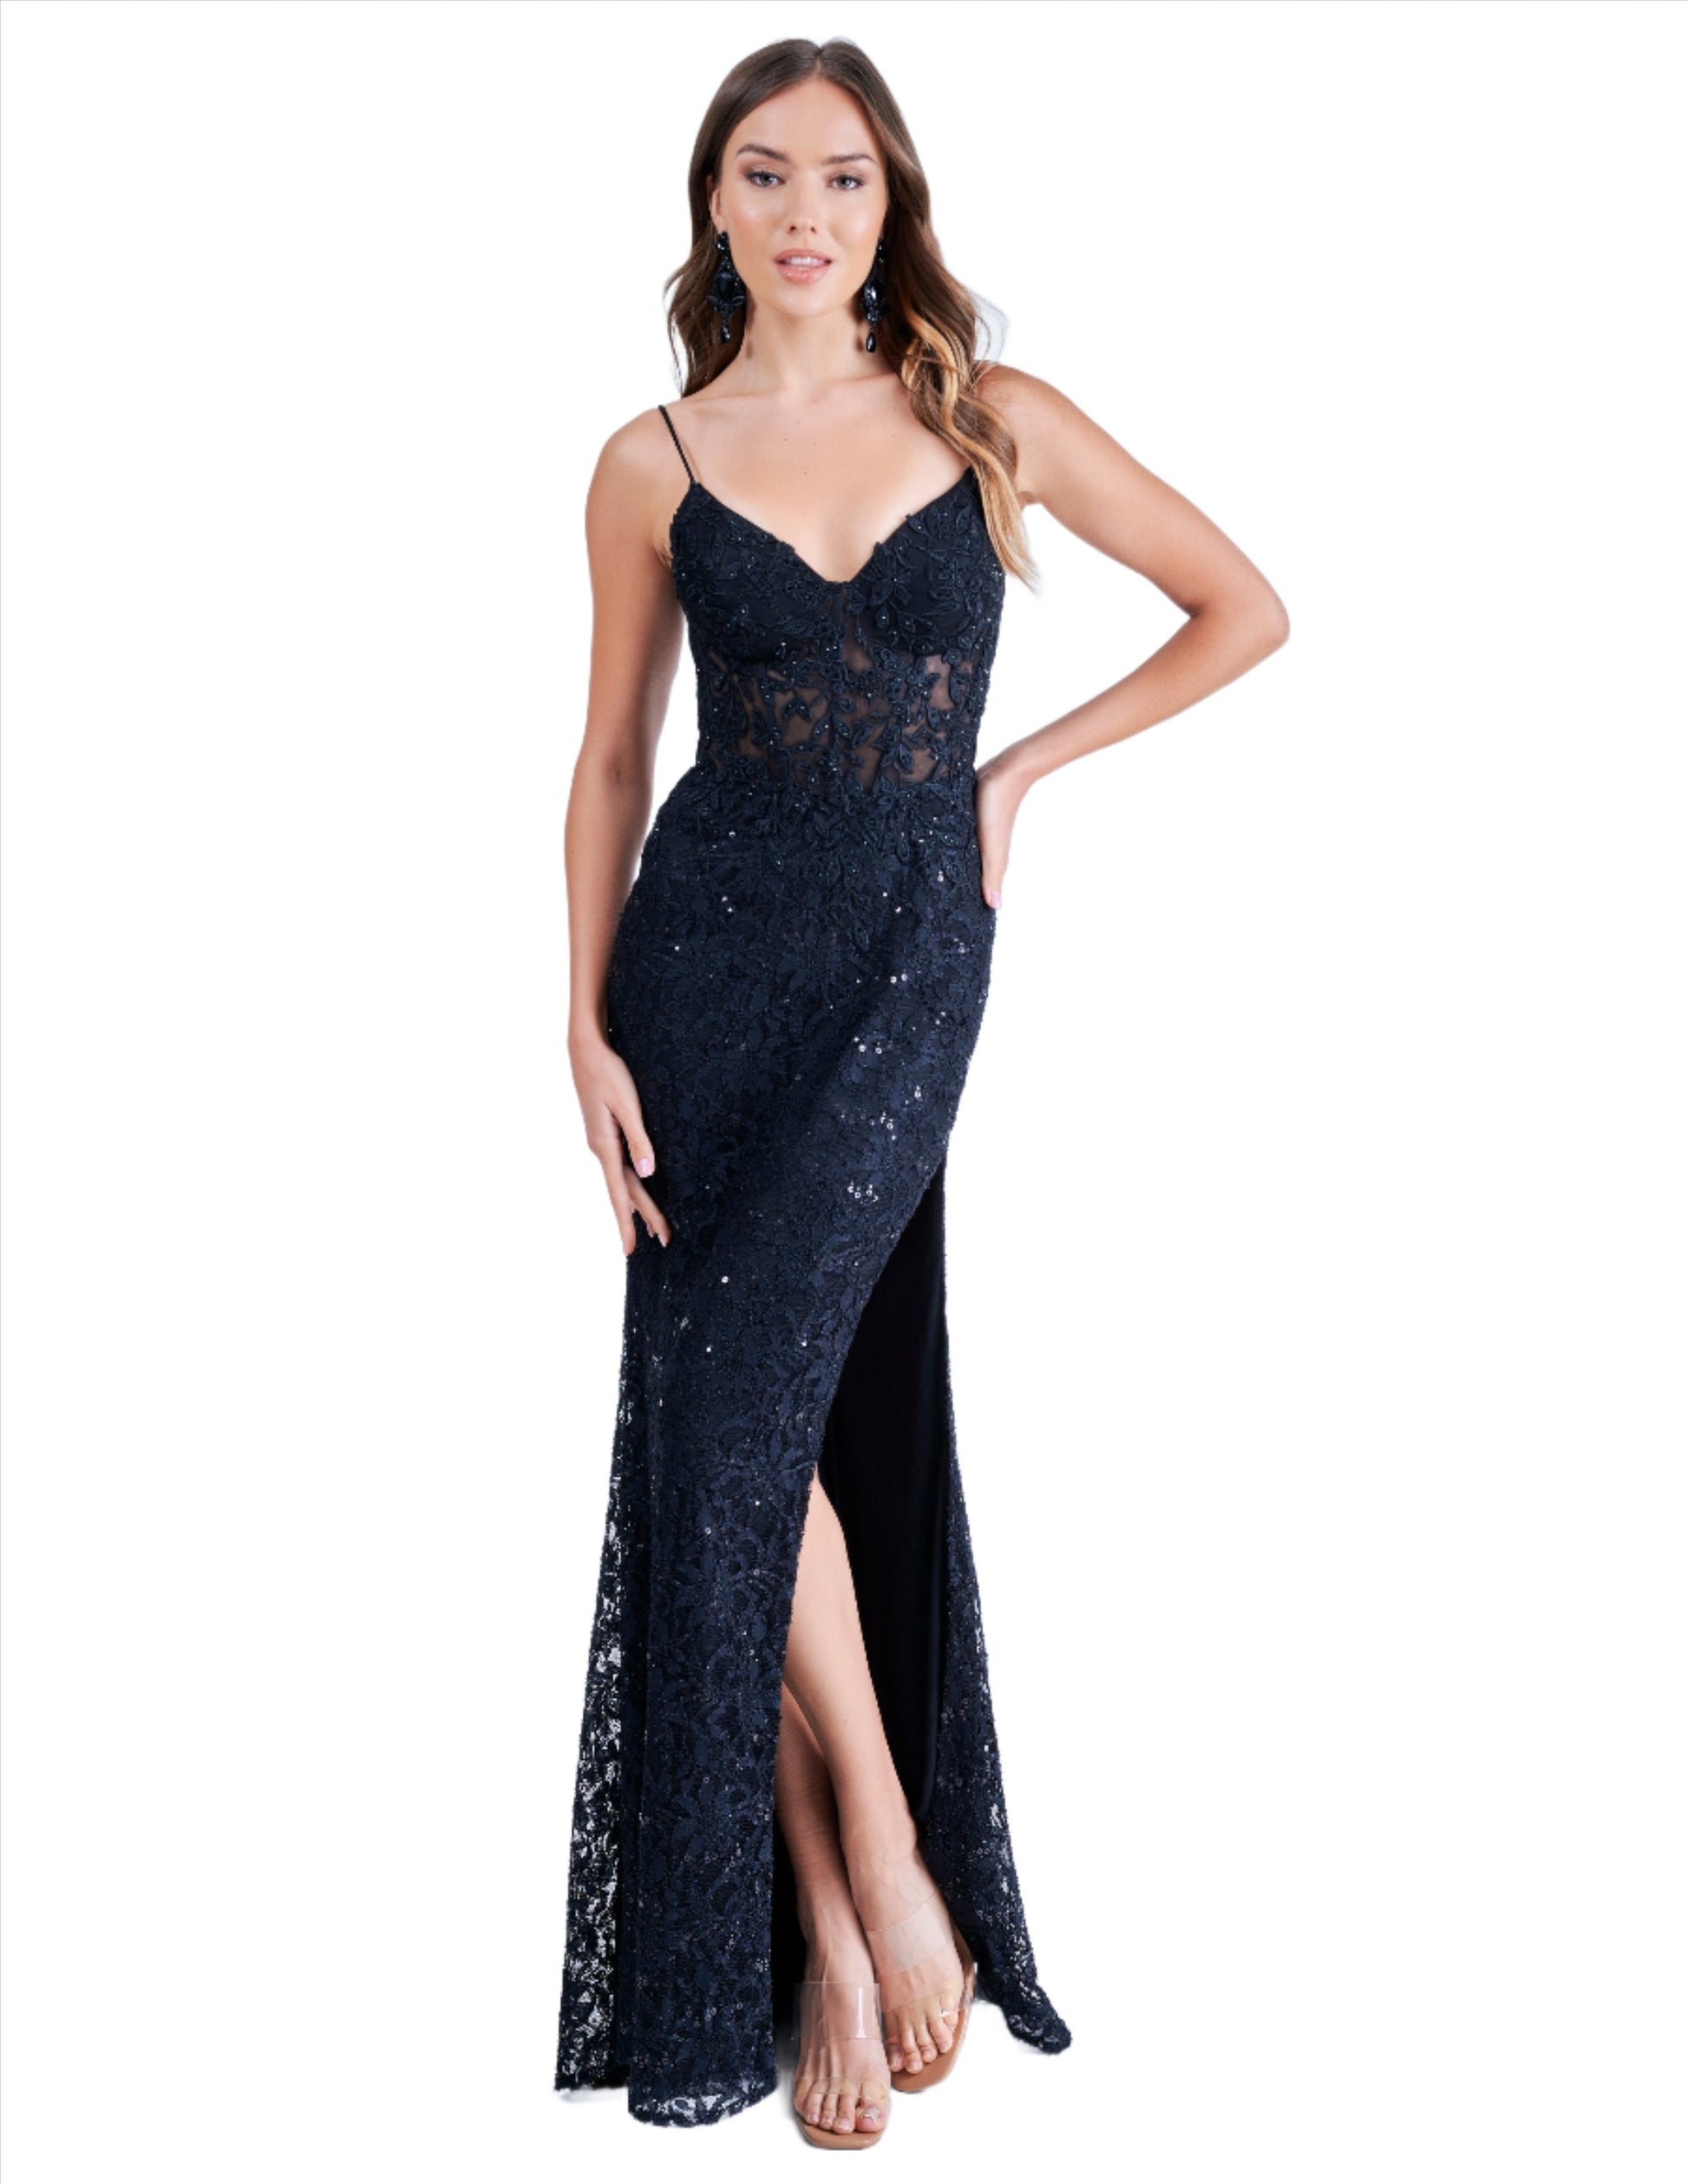 Elevate your evening look with the Nina Canacci 1568 formal dress. Featuring a sheer lace corset and a striking sequin crystal V neck, this dress exudes elegance and sophistication. The corset detail cinches the waist for a flattering silhouette, while the slit adds a touch of sultry appeal. Perfect for prom or any formal event.